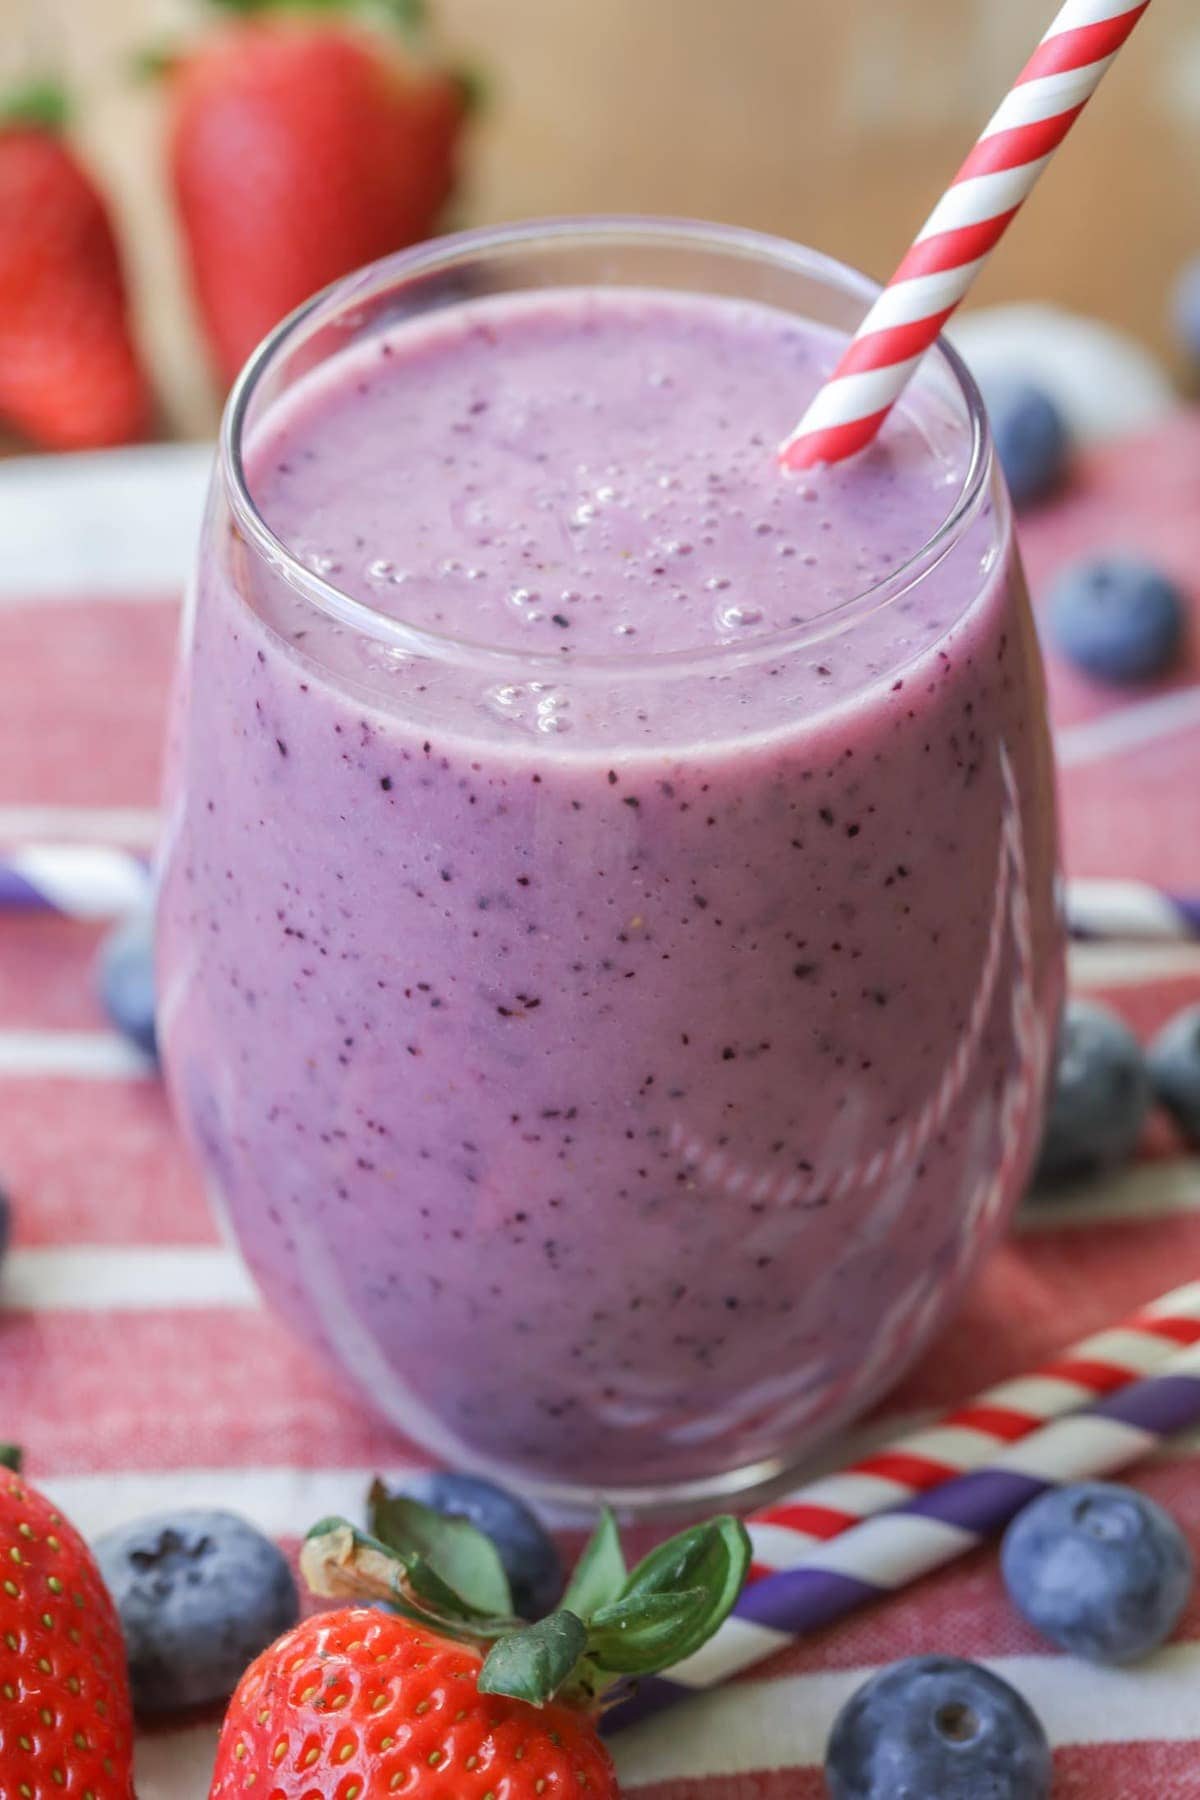 Strawberry and Blueberry Smoothies in a glass served with a red and white straw.